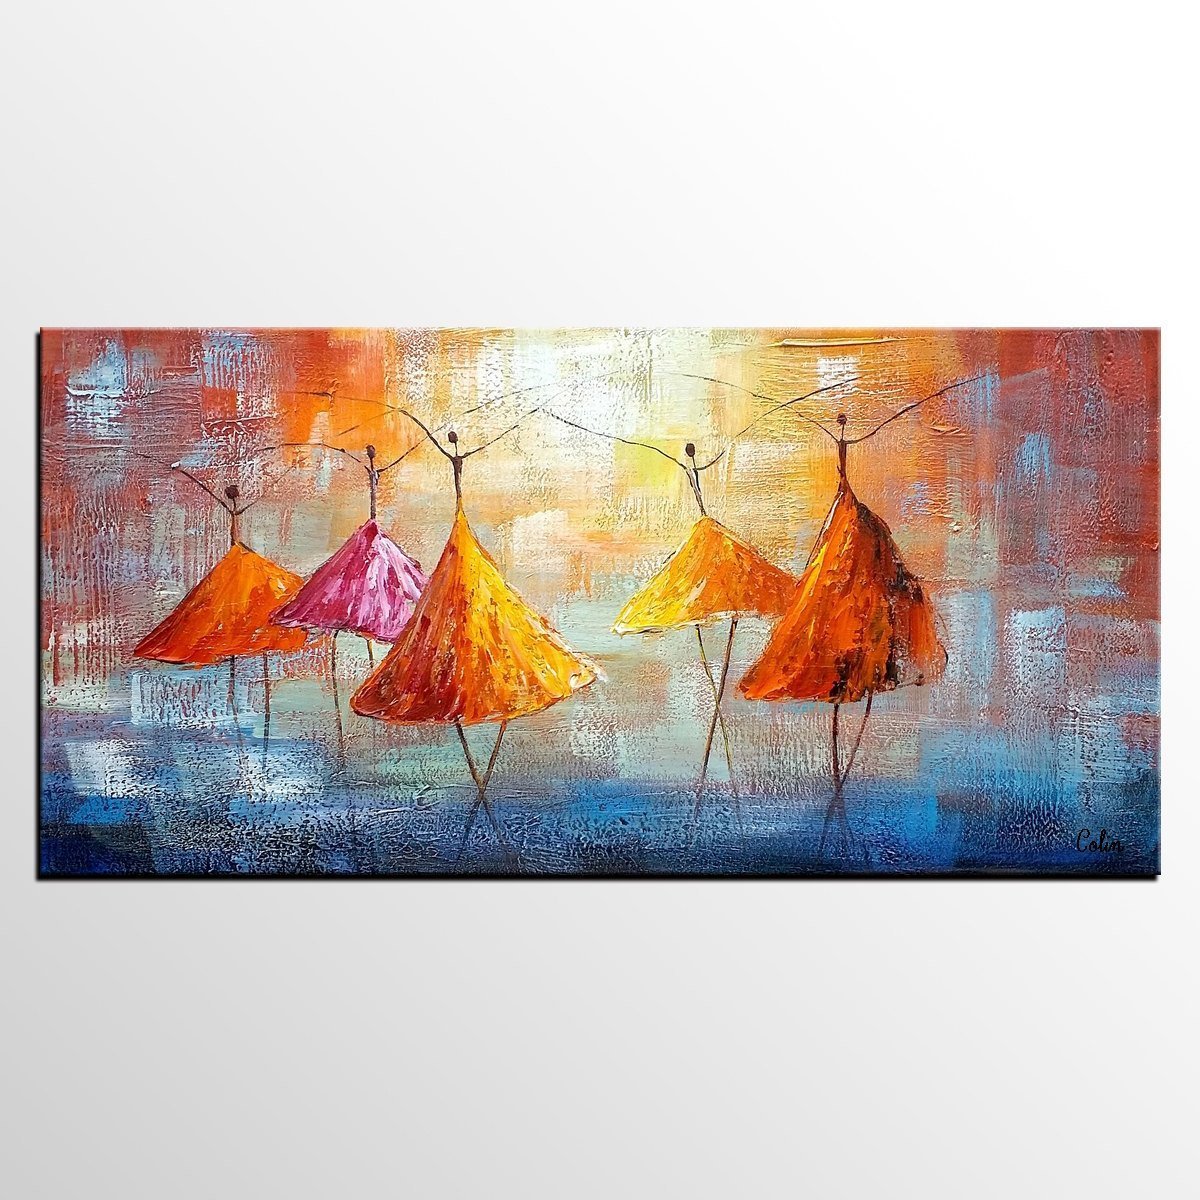 Abstract Artwork, Contemporary Artwork, Ballet Dancer Painting, Painting for Sale, Original Painting-LargePaintingArt.com